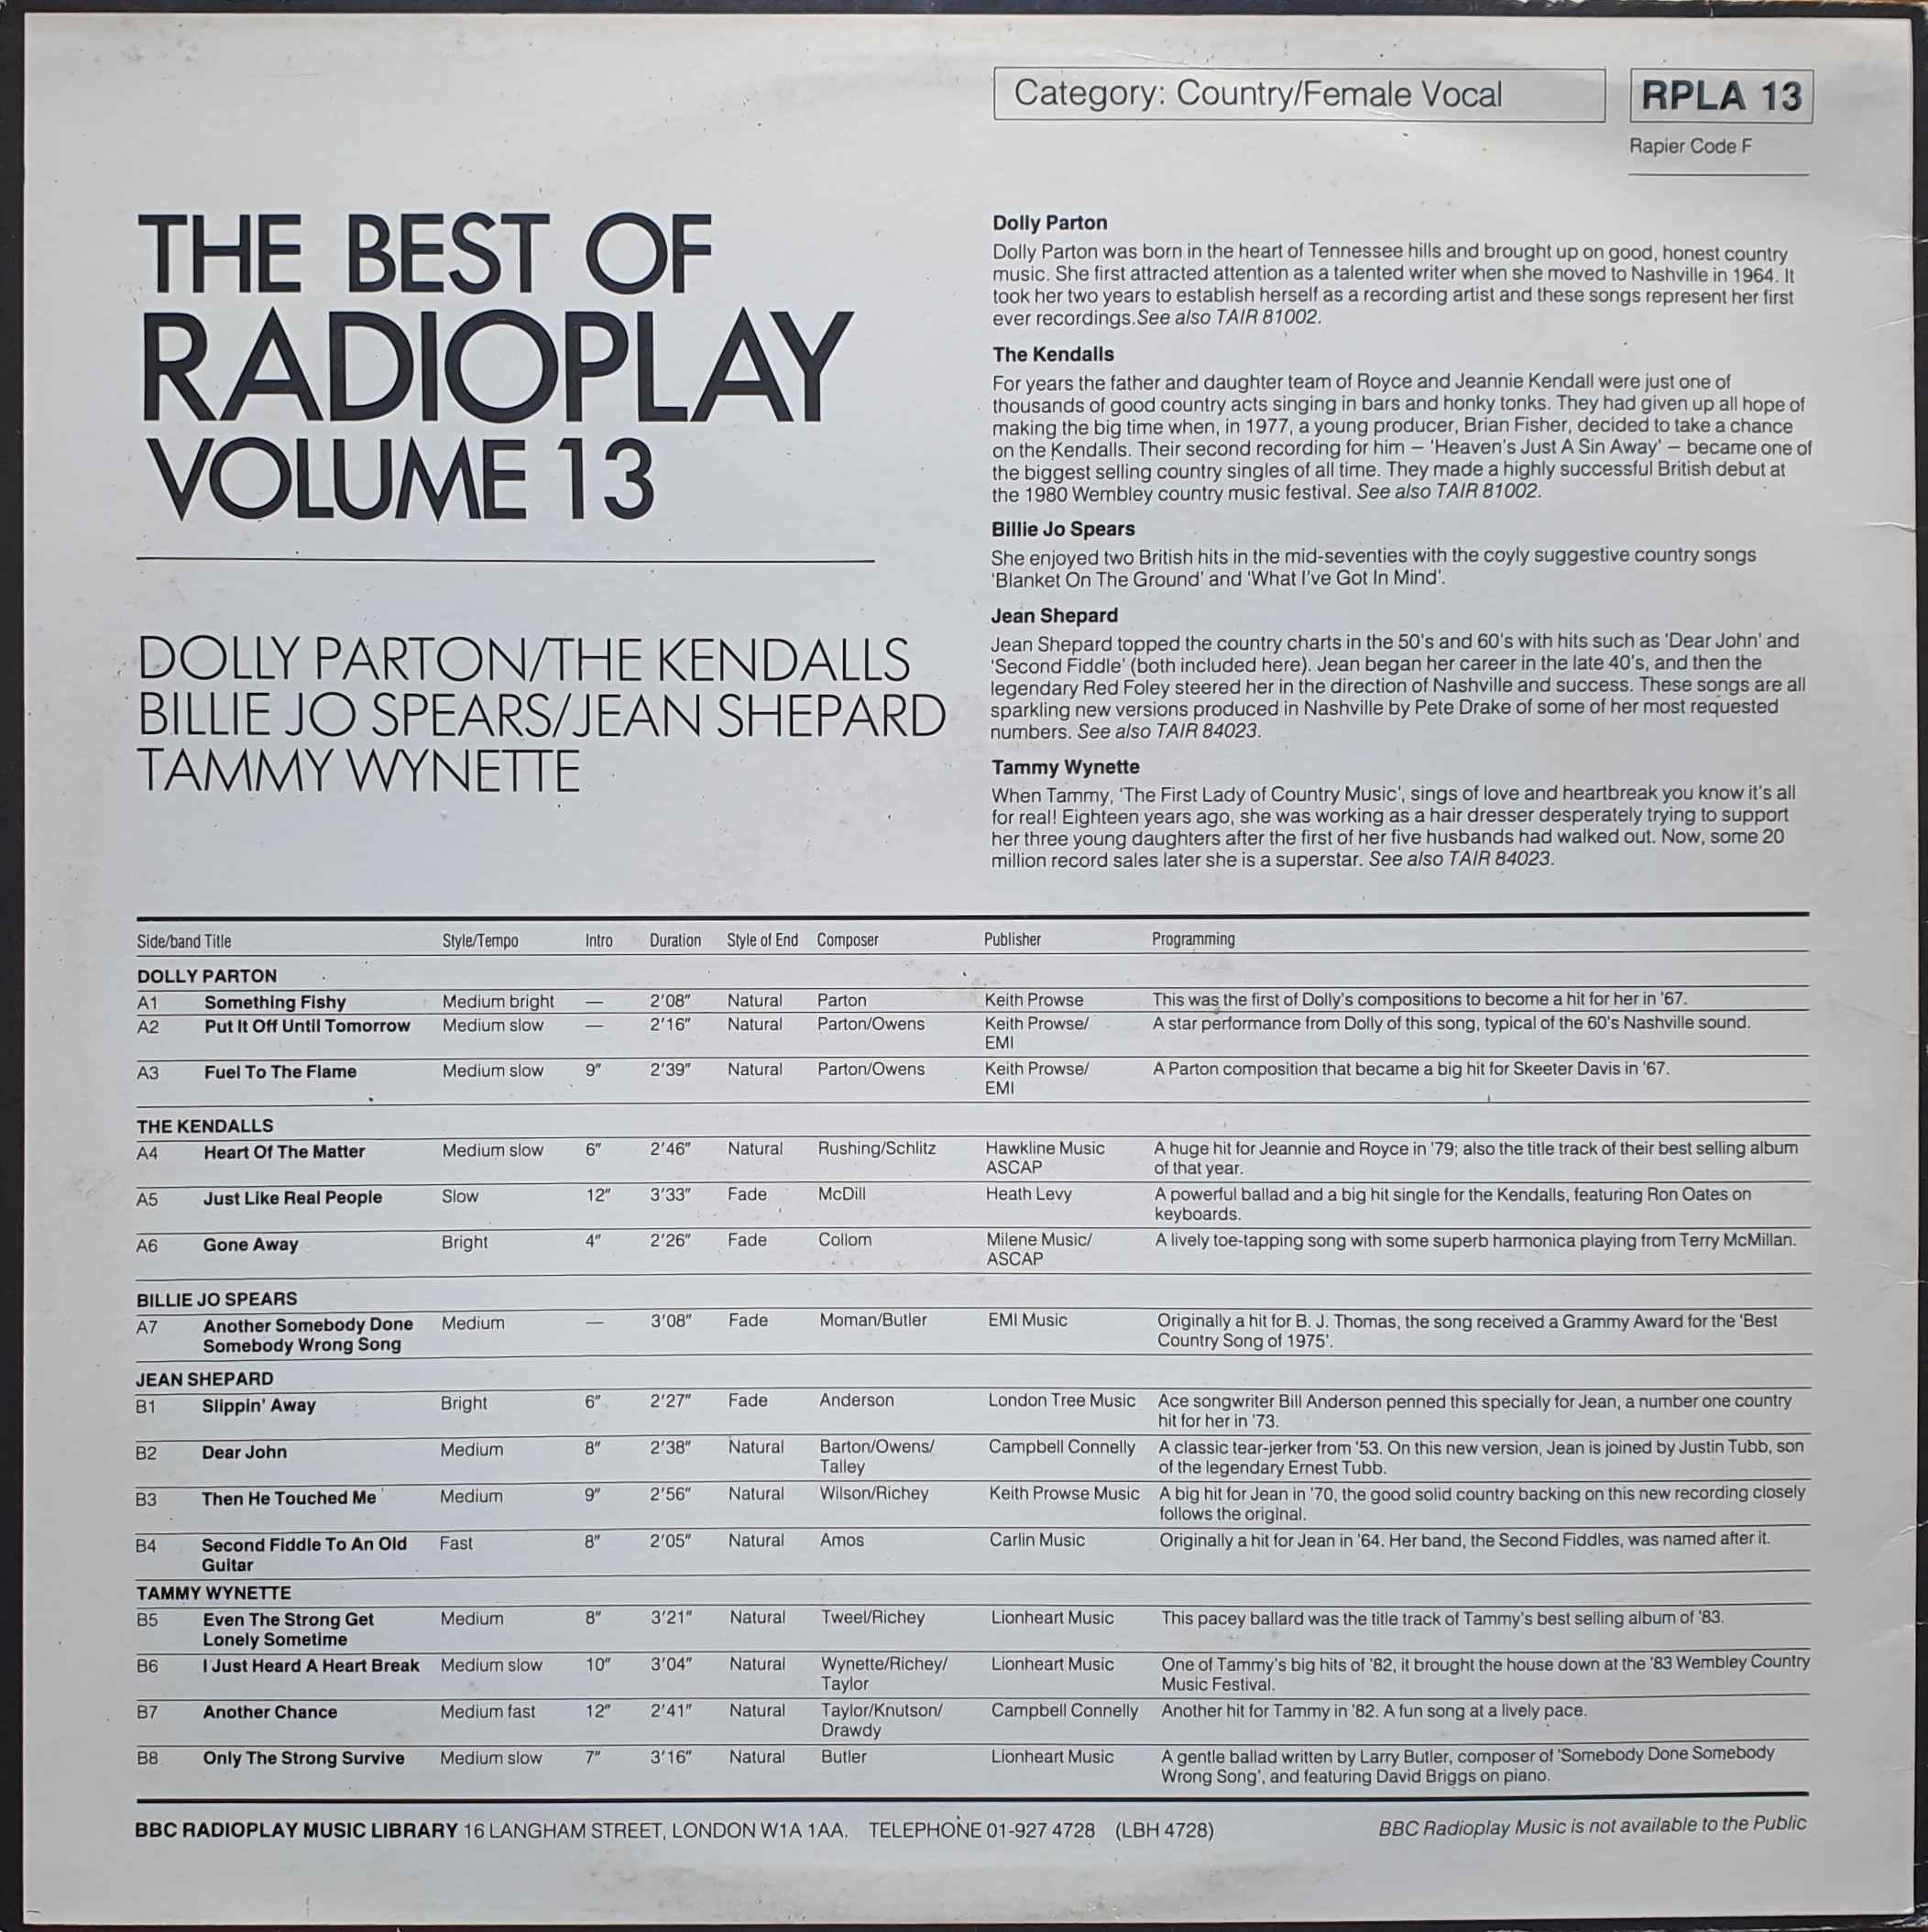 Picture of RPLA 13 The best of Radioplay - Volume 13 - Country / Female vocals by artist Dolly Parton / The Kendalls 
 / Billy Jo Spears / Jean Shepard / Tammy Wynette from the BBC records and Tapes library